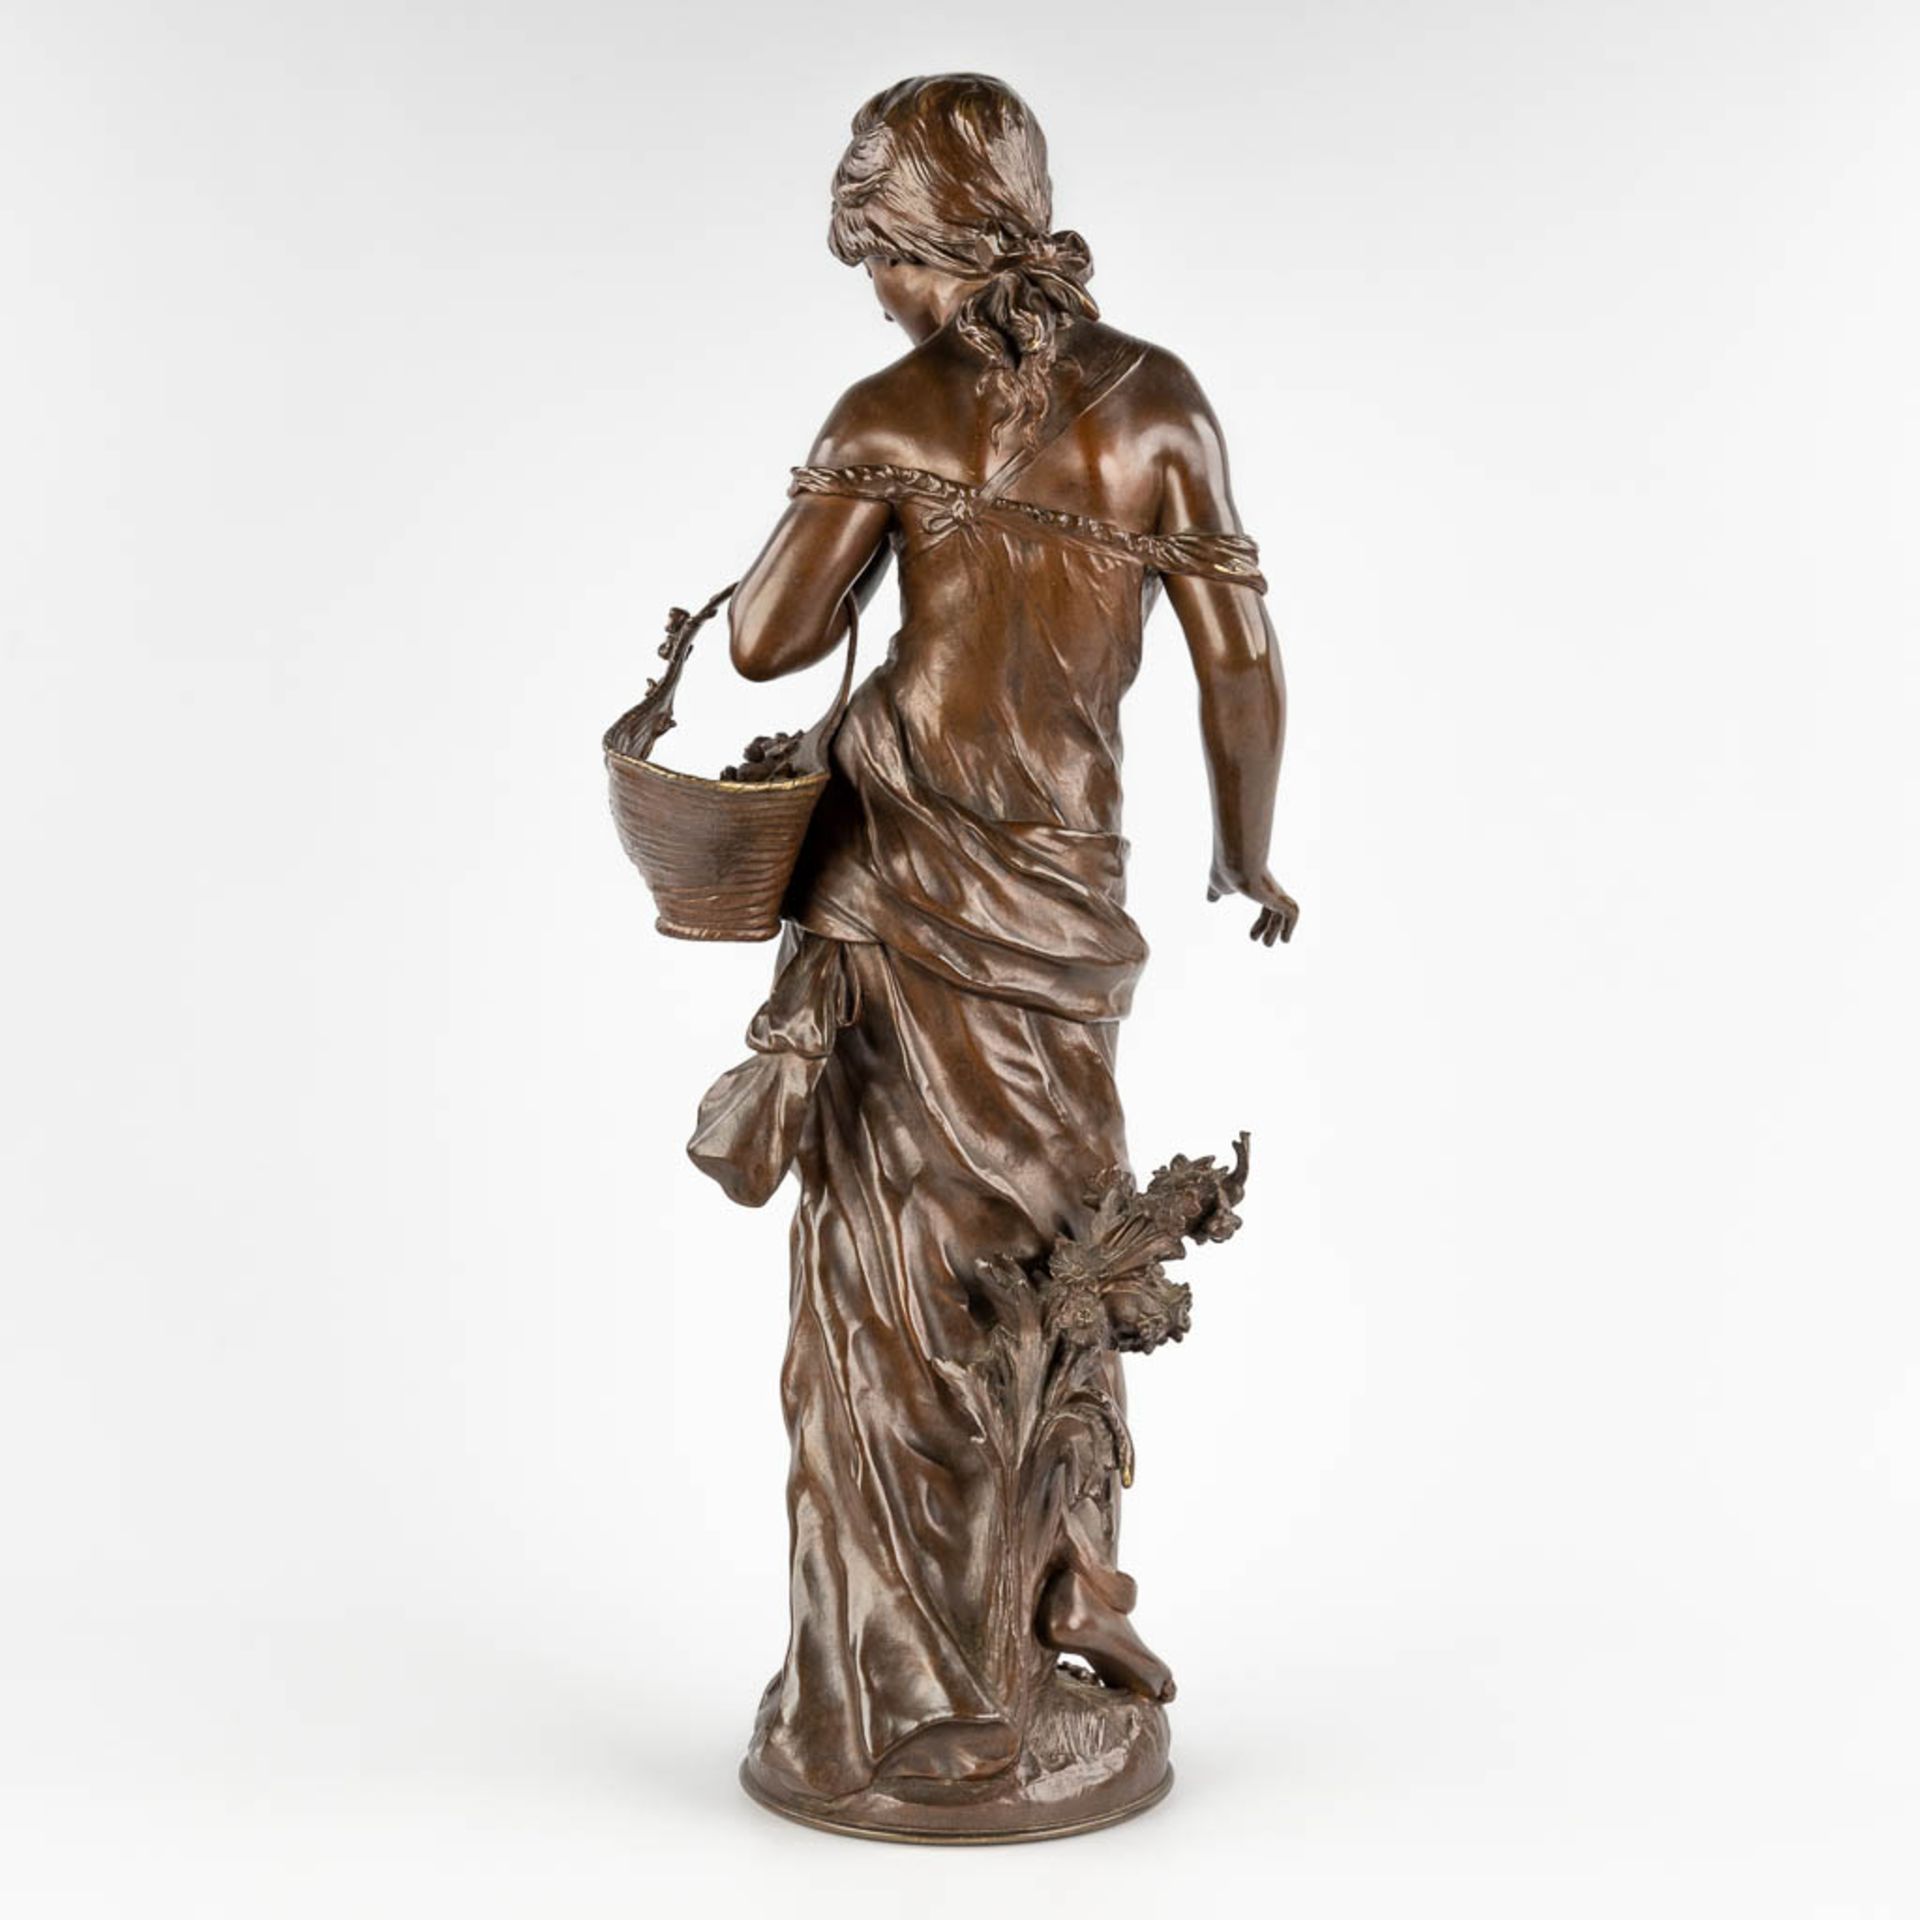 Auguste MOREAU (1834-1917) 'Picking the Flowers' patinated bronze. 19th C. (D:23 x W:30 x H:72 cm) - Image 5 of 12